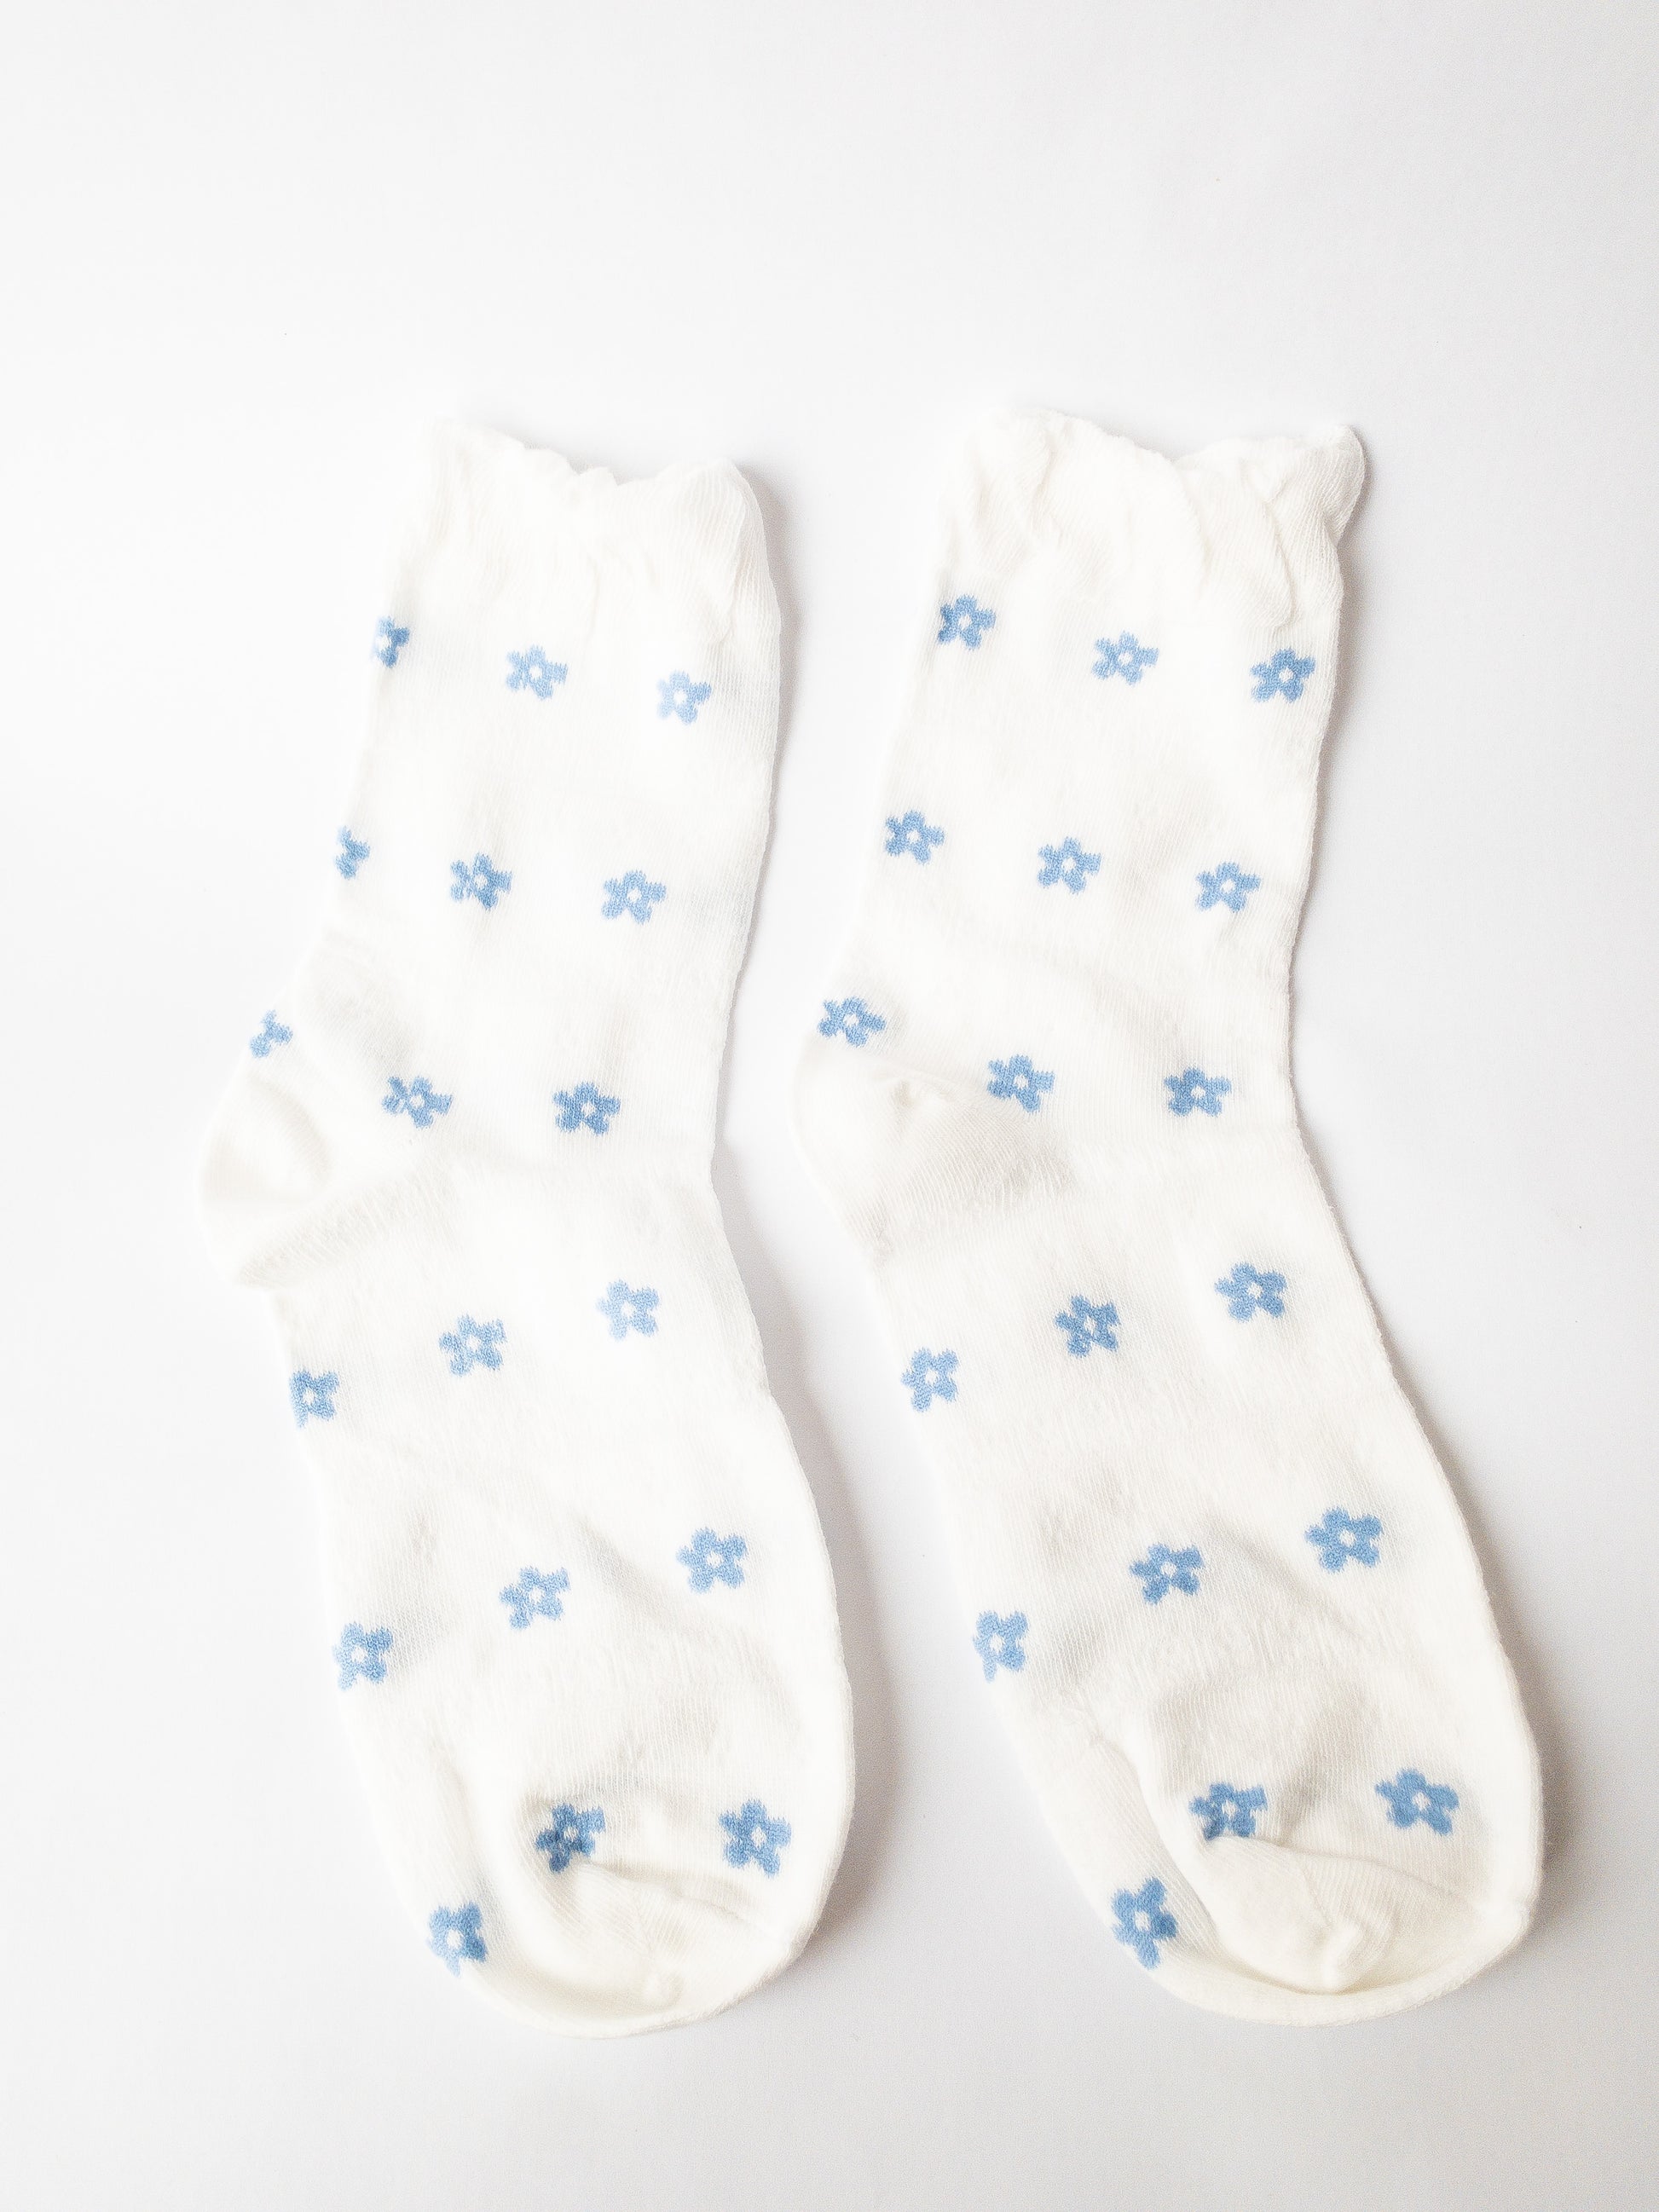 A soft floral socks set of 3 of the gentlest socks with tender ruffles. One pair is classic white and blue, one pair has delicate blue flowers throughout, and one pair is solid white with a sheer peekaboo floral lace.  Adult size 4-10, crew socks length.